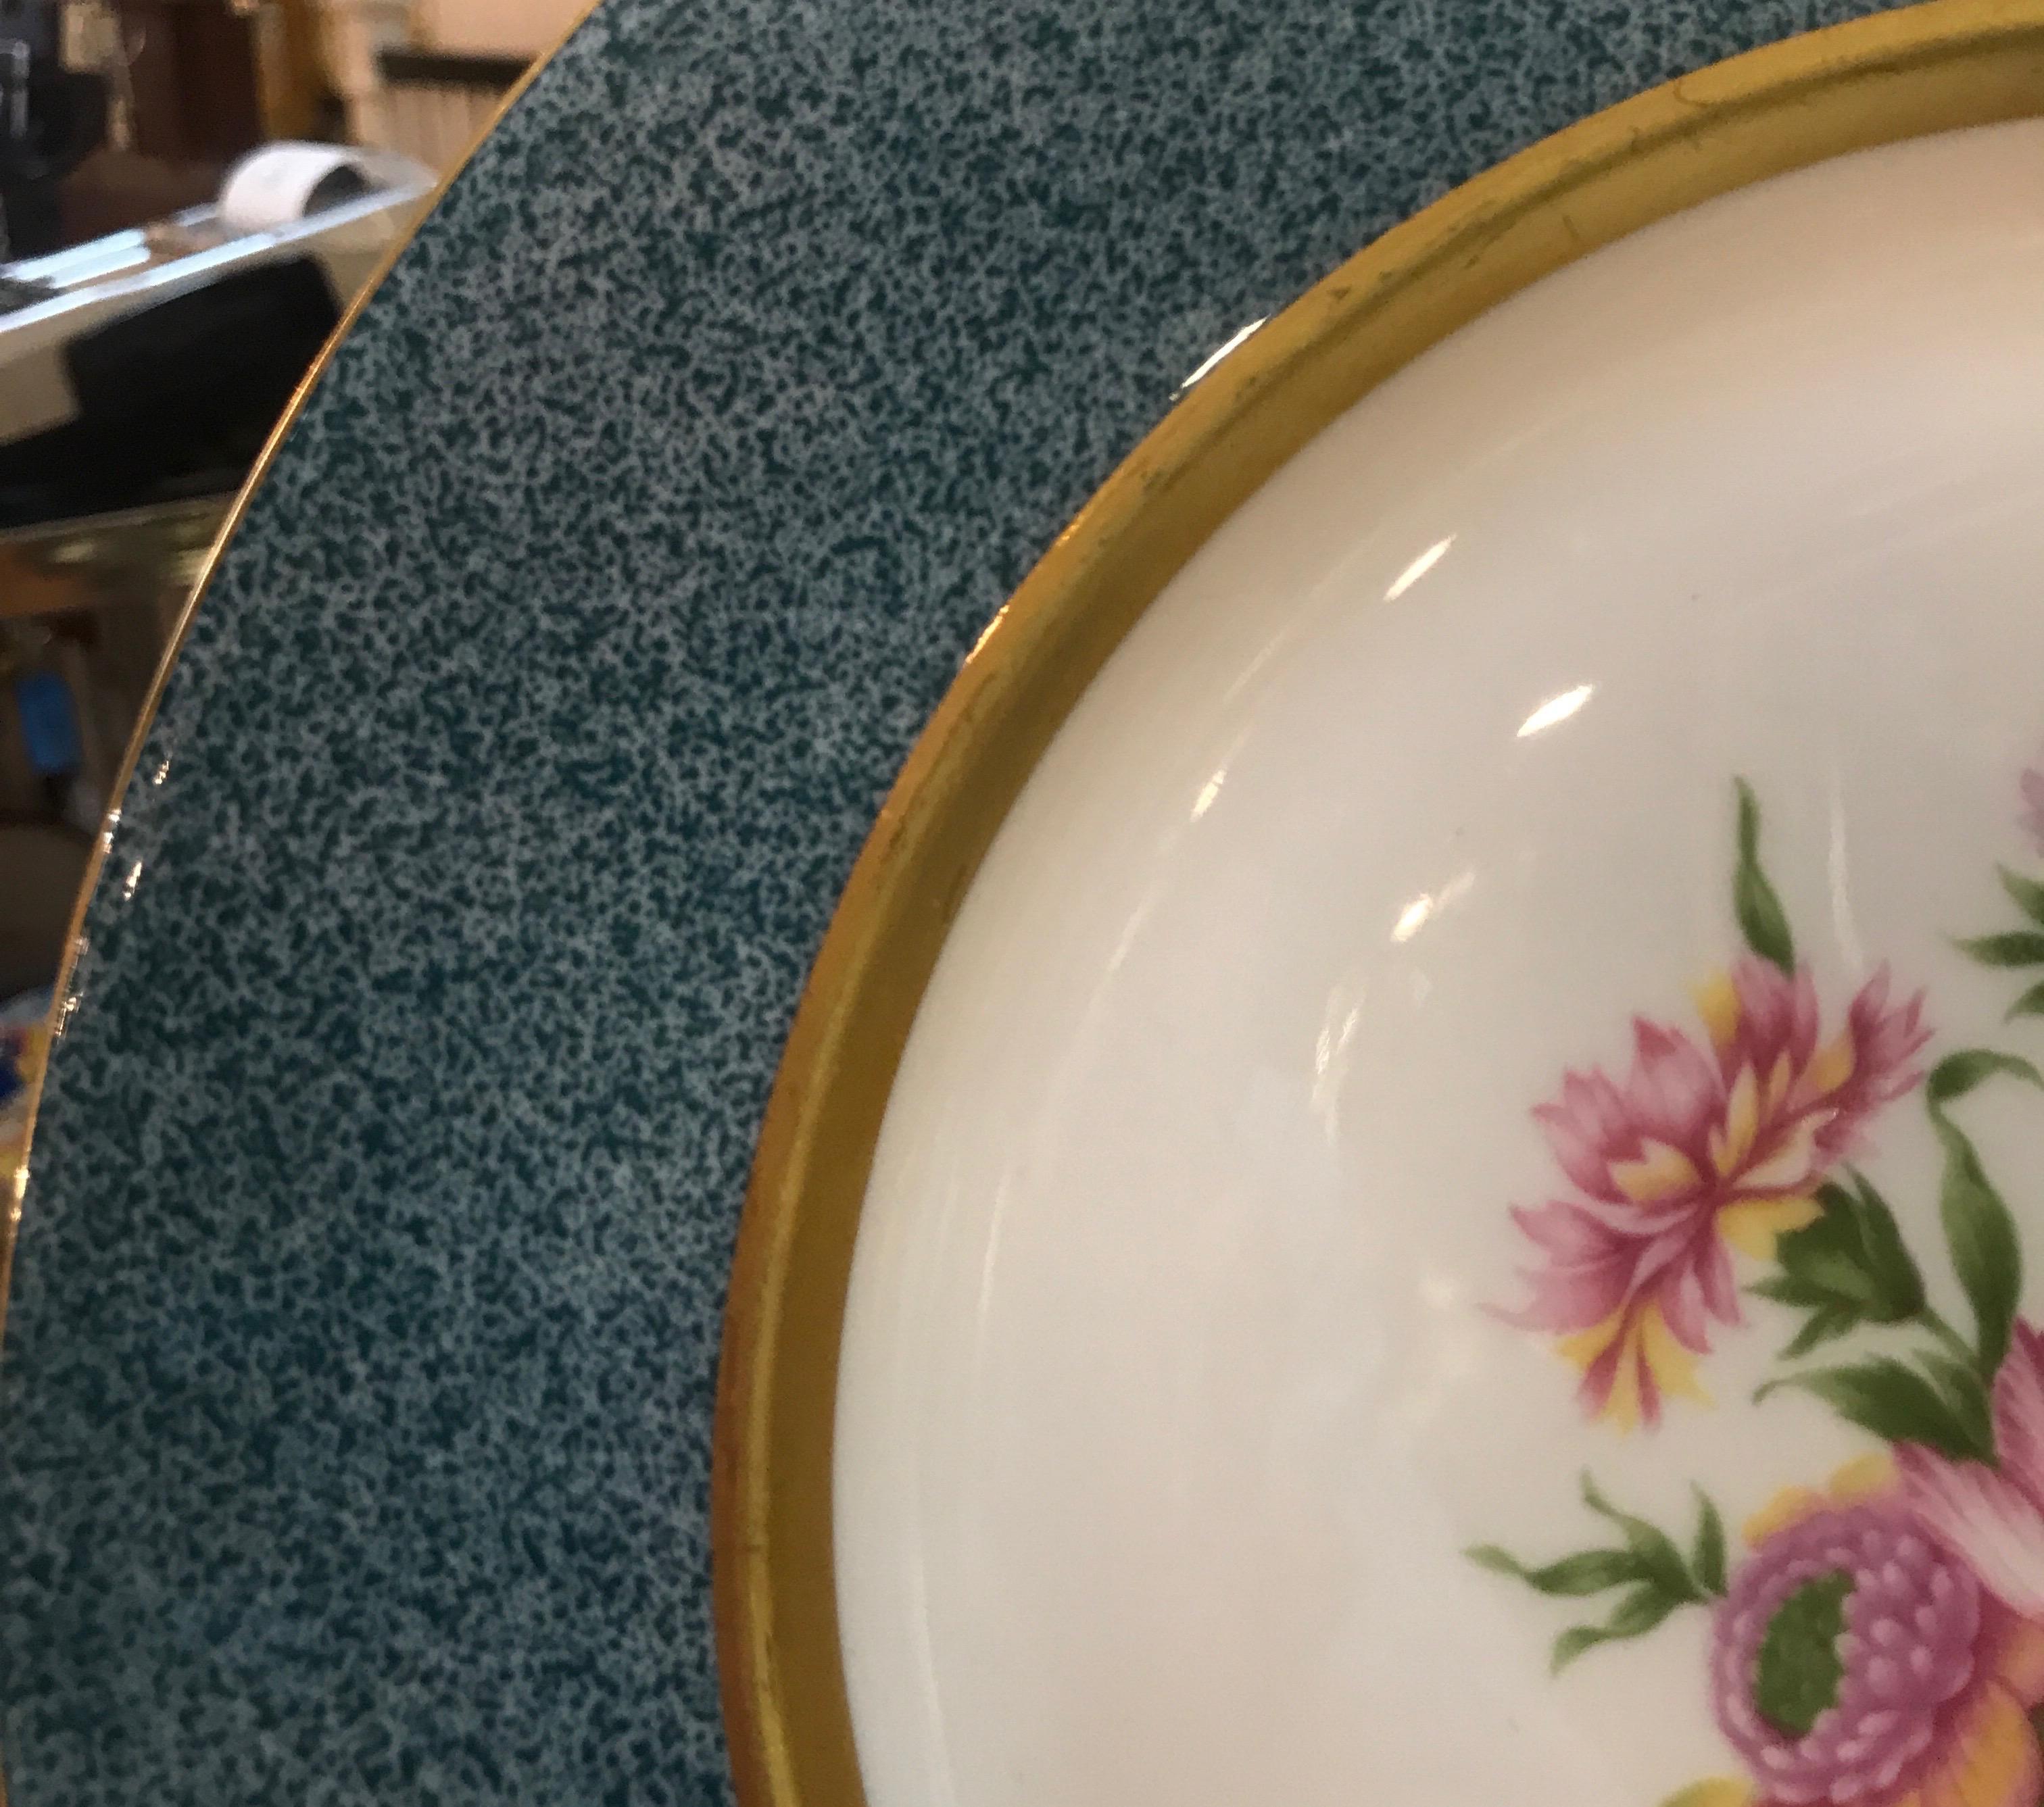 American Set of 12 Theodore Haviland Floral and Gilt Service Dinner Plates 10.75 Diameter For Sale